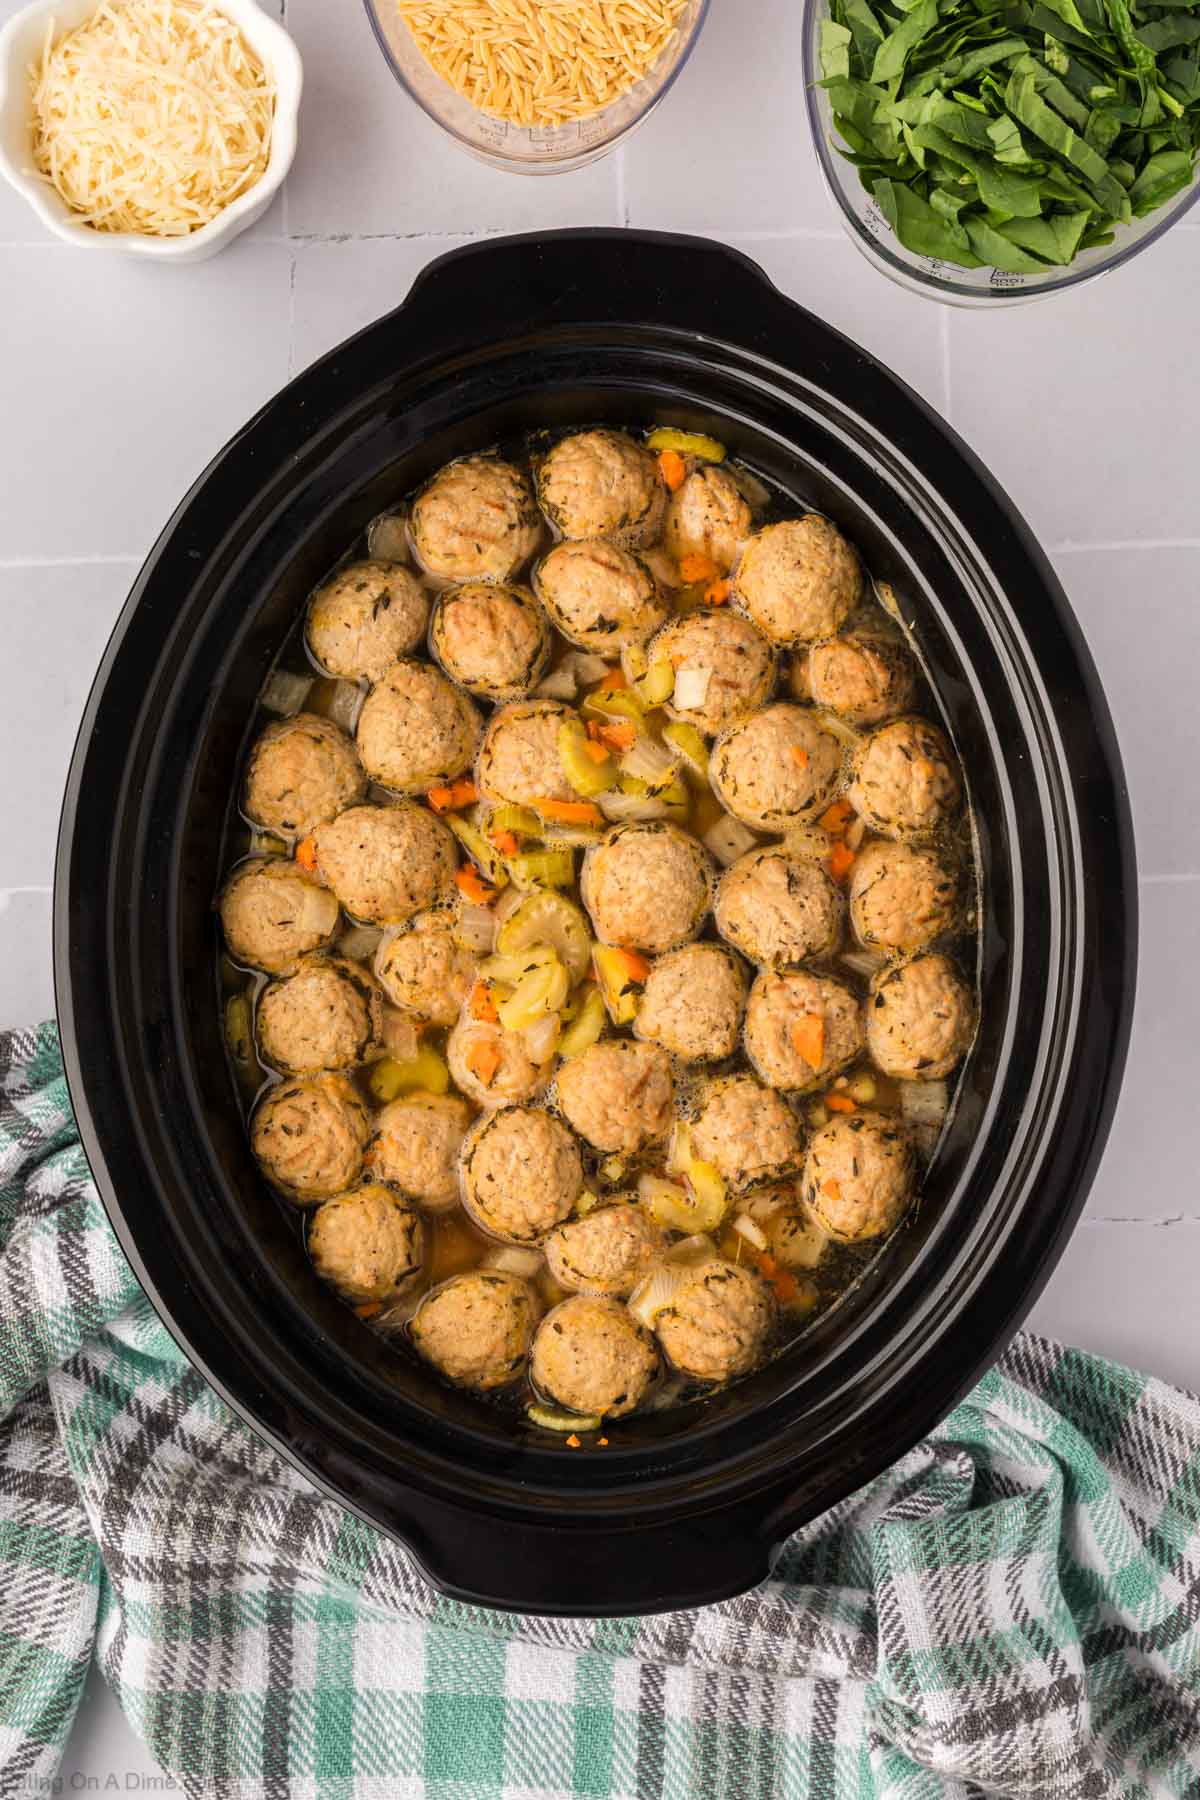 Cooking the meatball with the broth and veggies in the slow cooker